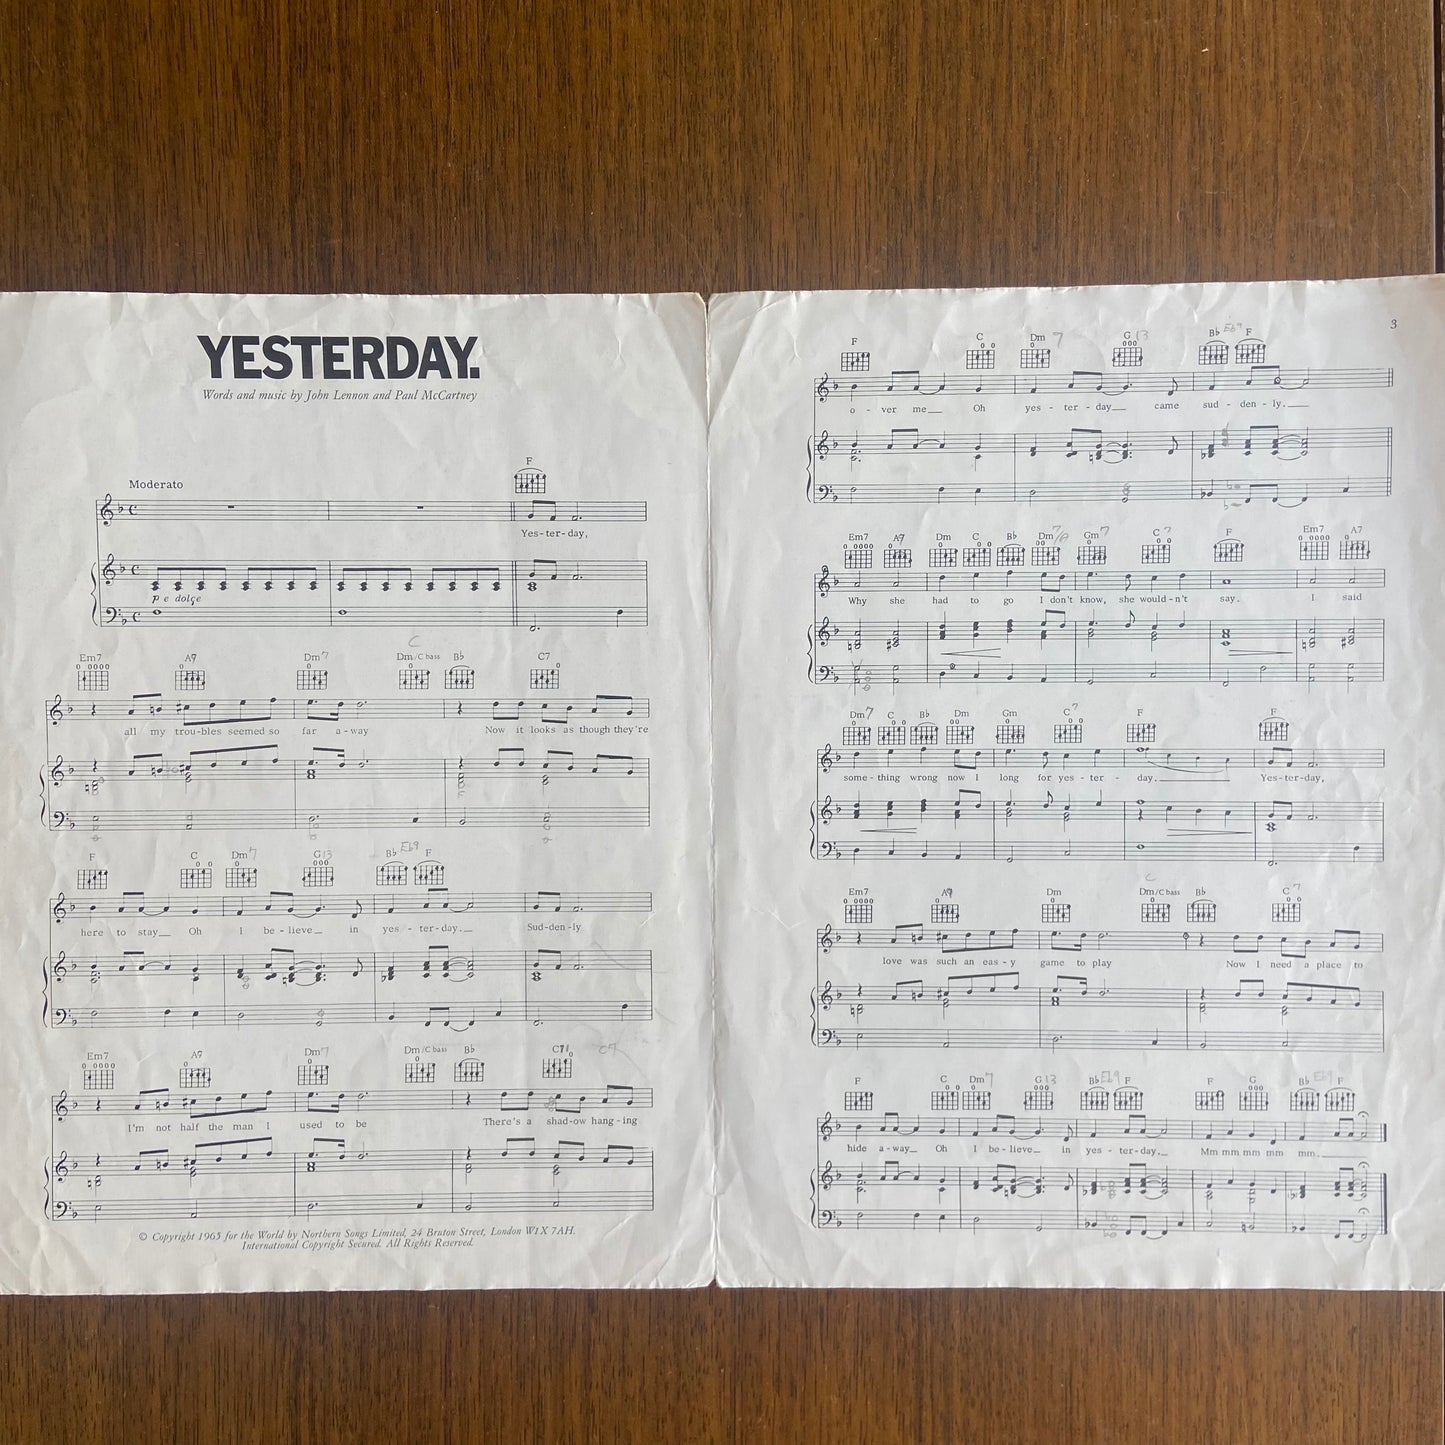 The Beatles 'Yesterday' Sheet Music Poster